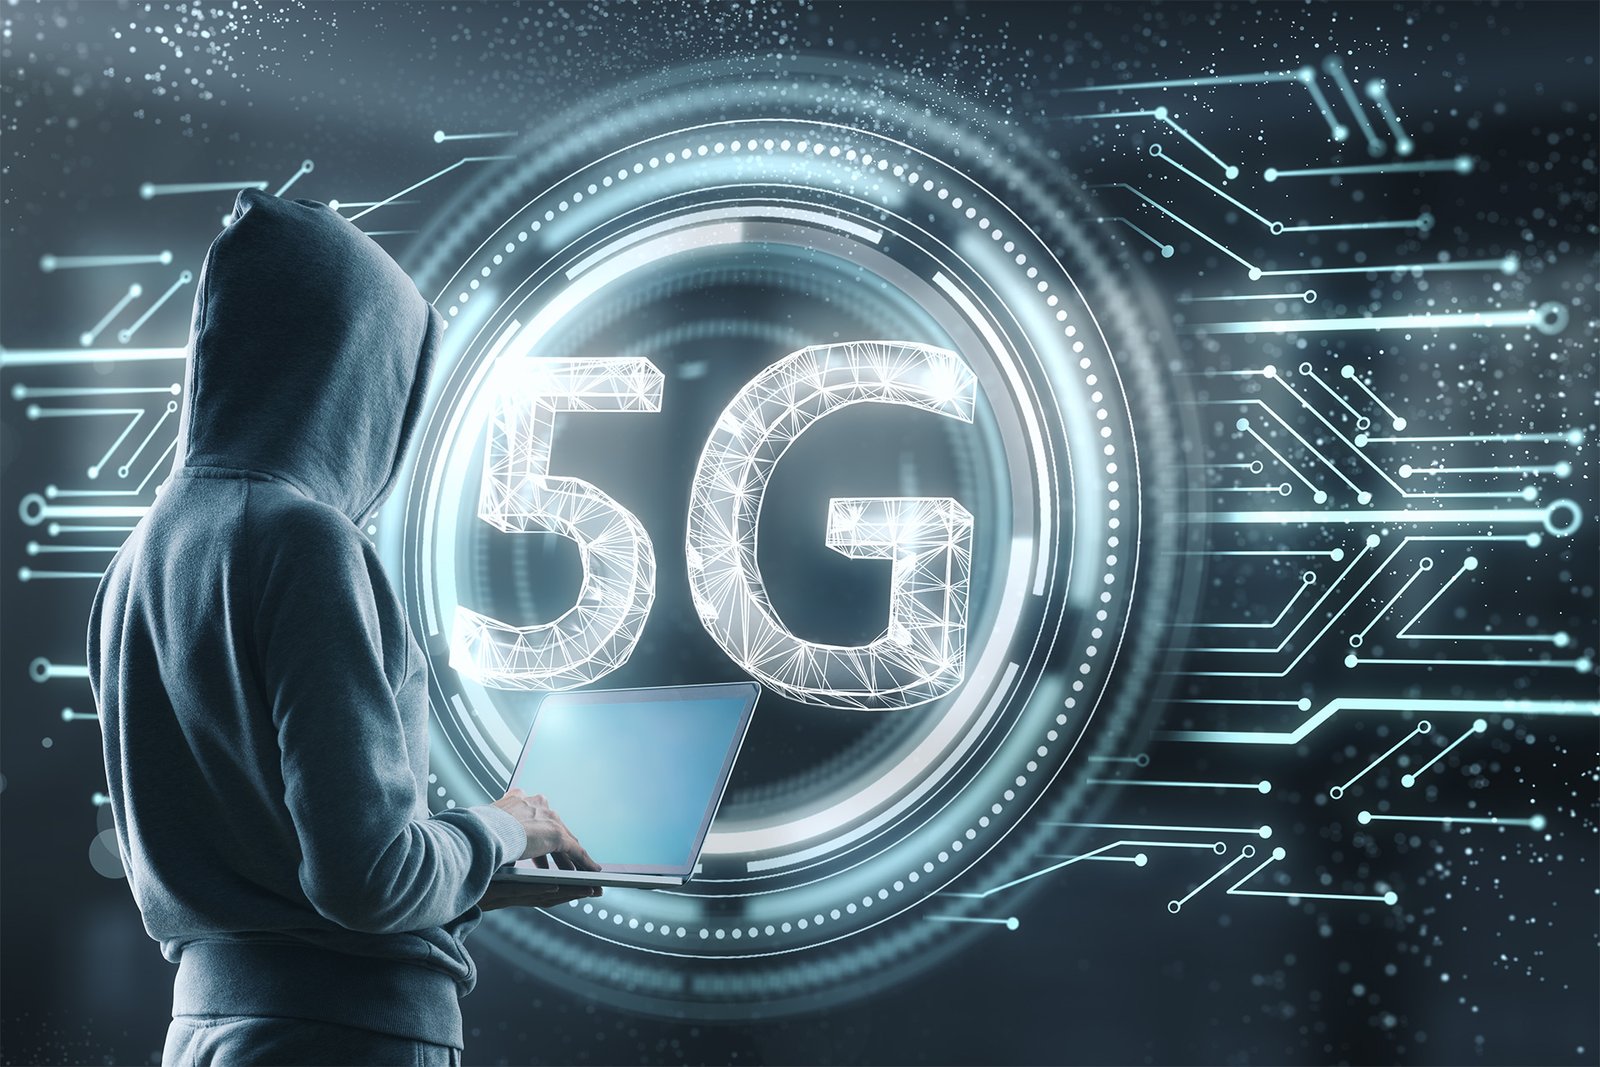 The 5G Revolution: What is 5G? Faster, Smarter, Better